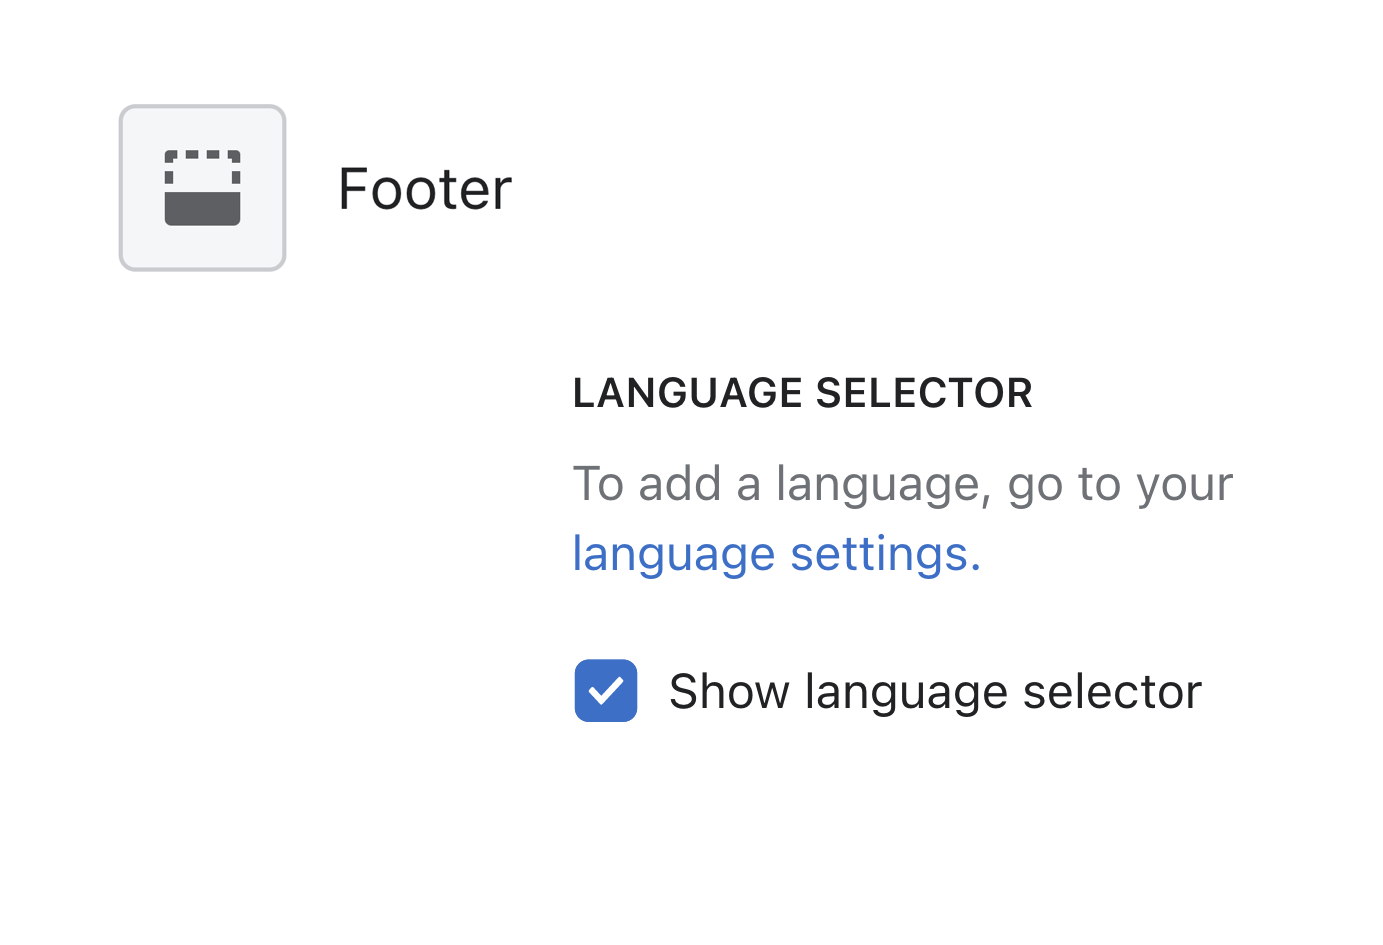 activate_the_language_selector_in_footer.png